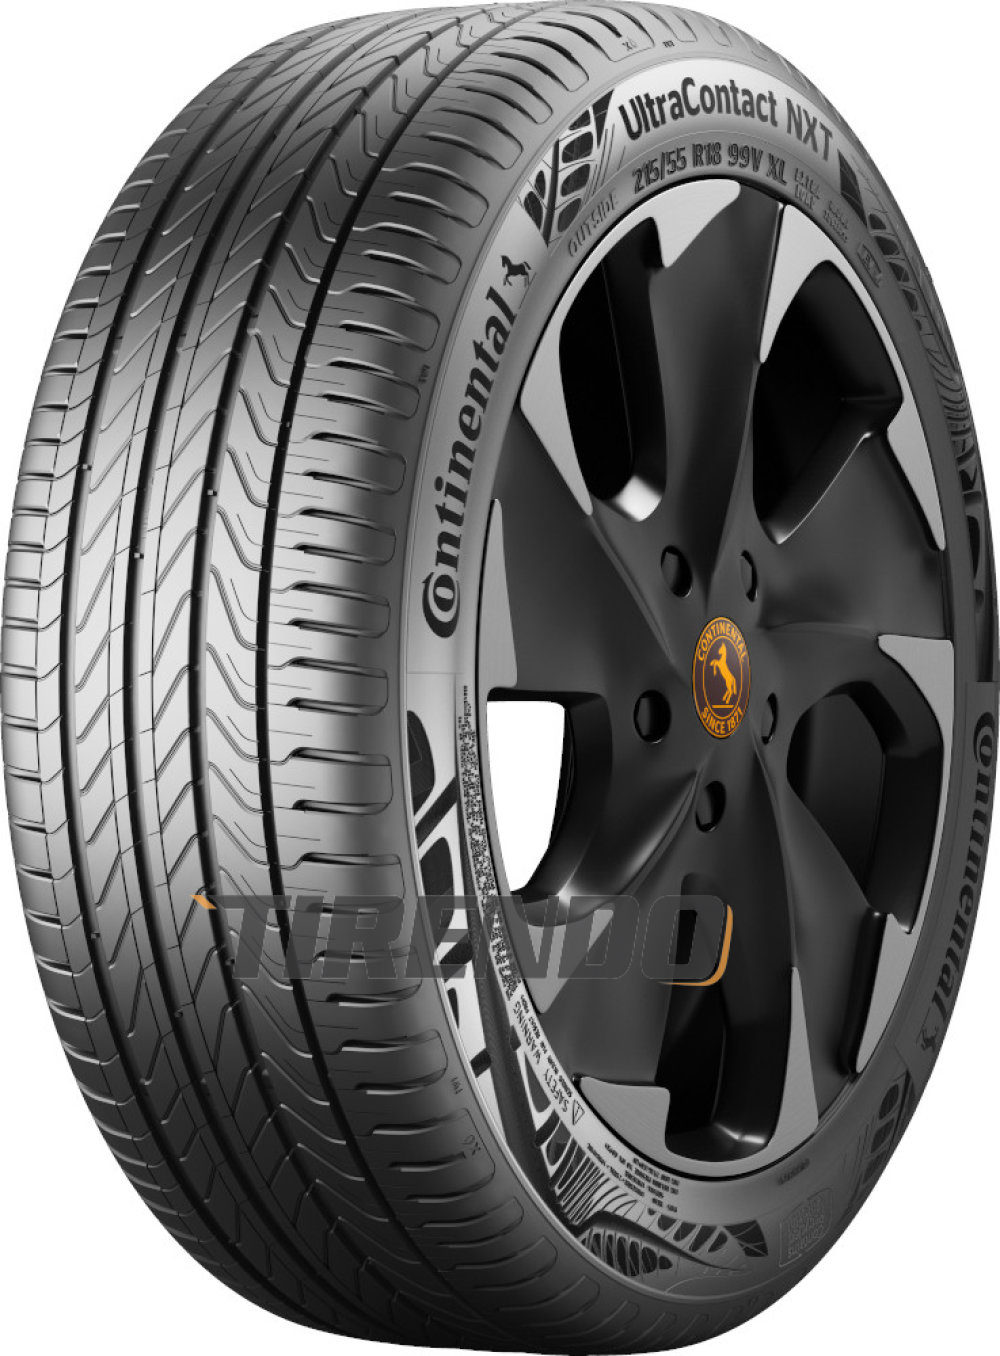 Continental UltraContact NXT - ContiRe.Tex ( 255/45 R20 105T XL CRM, EVc )